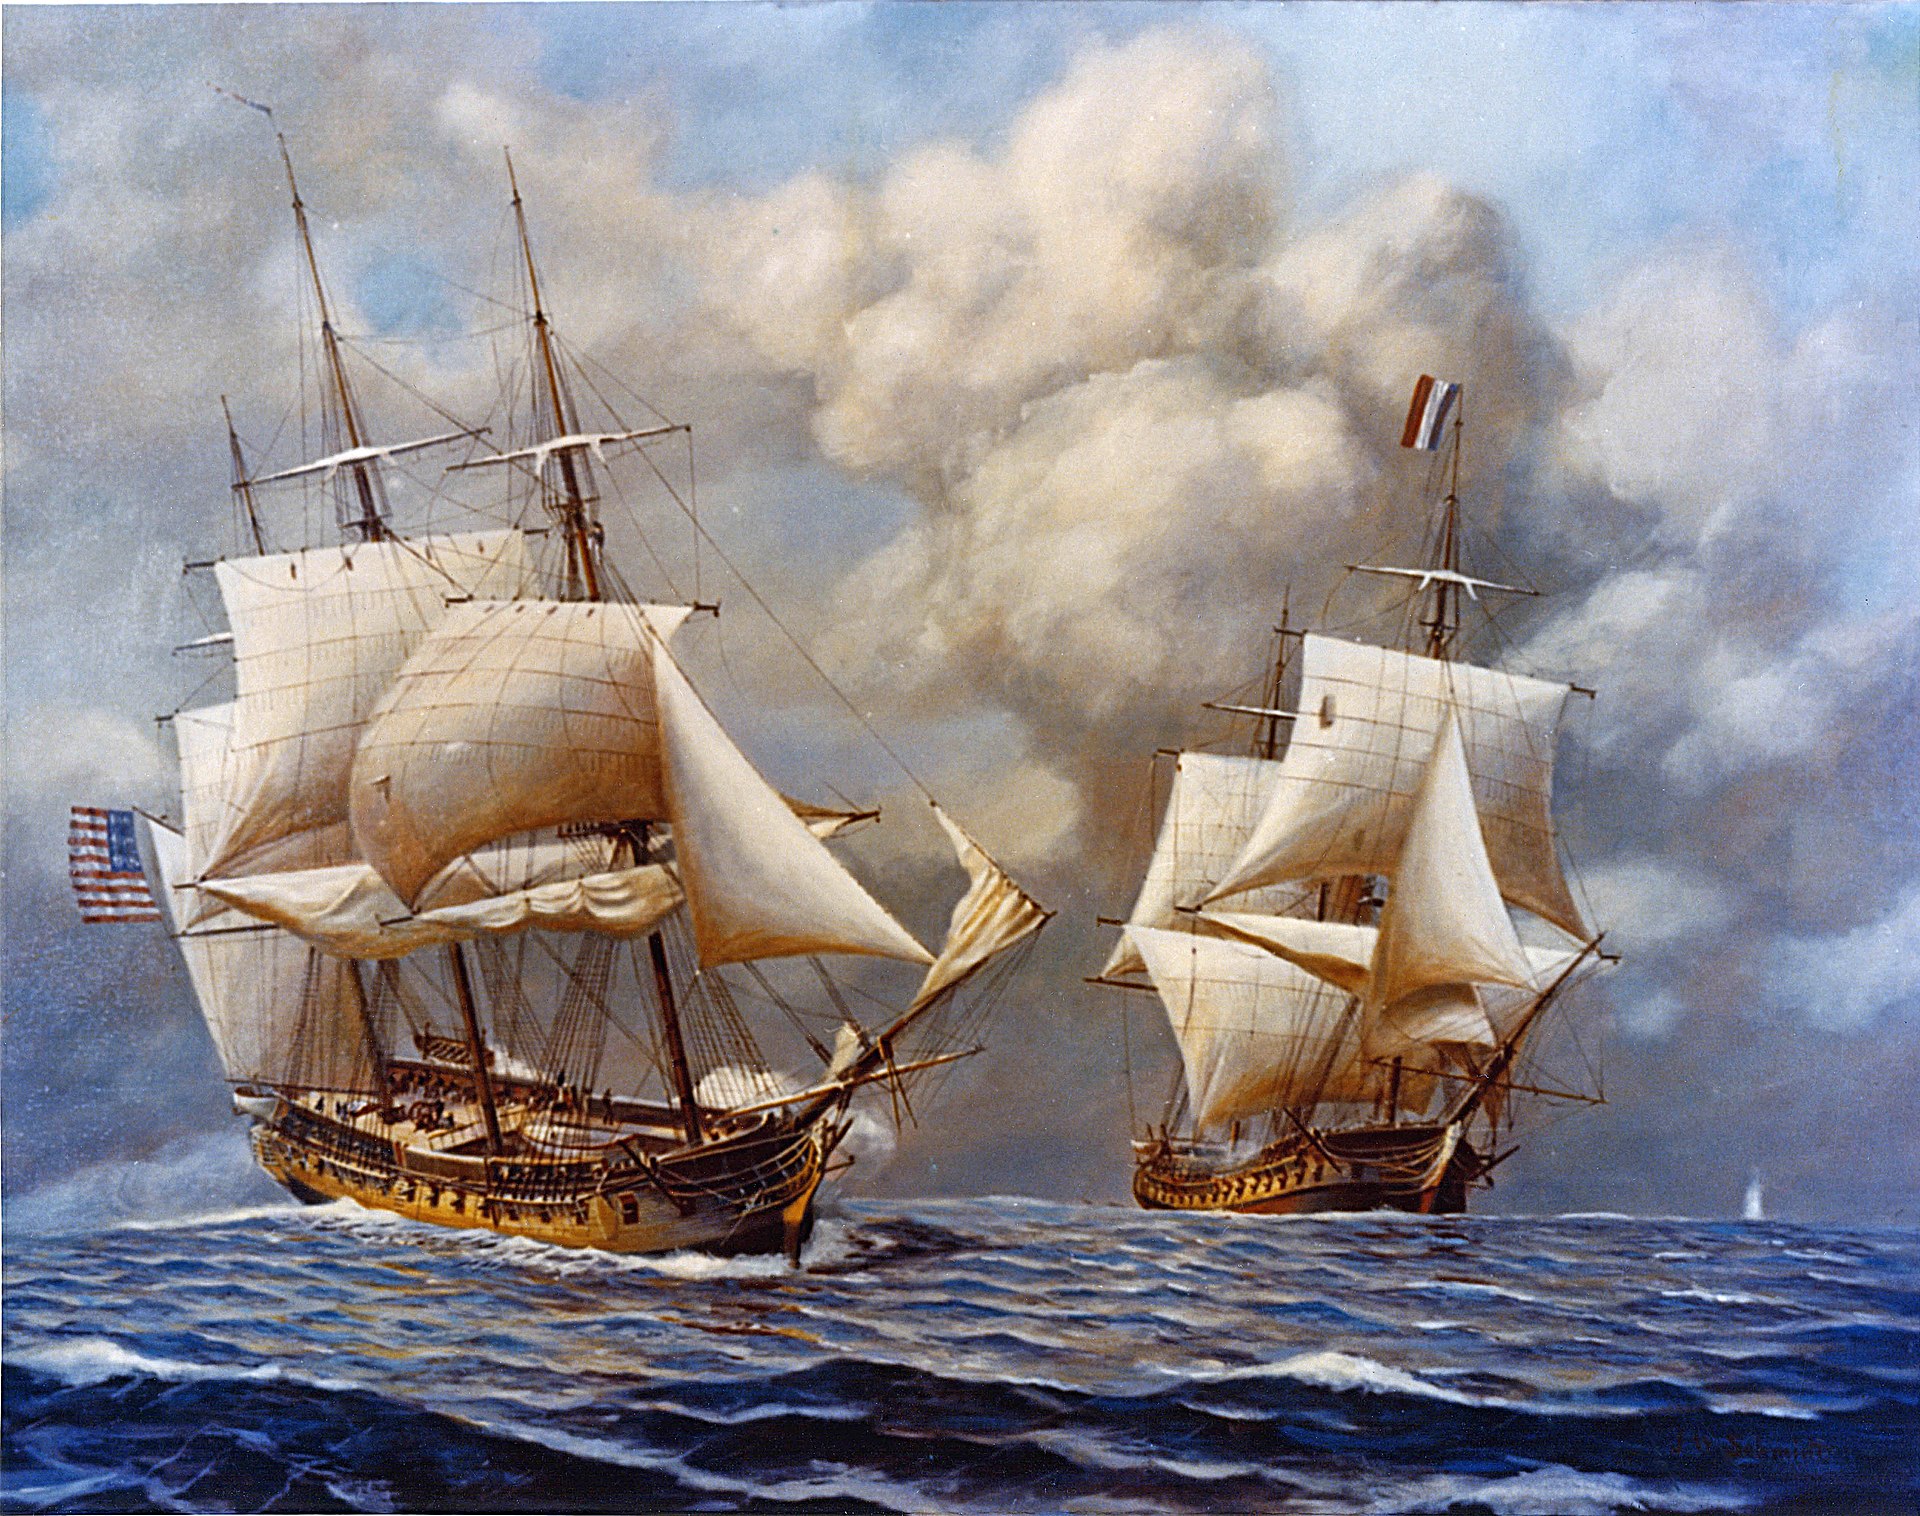 Constellation vs. L’Insurgent – How Commodore Truxtun Delivered the Fledgling U.S. Navy’s First Major Victory